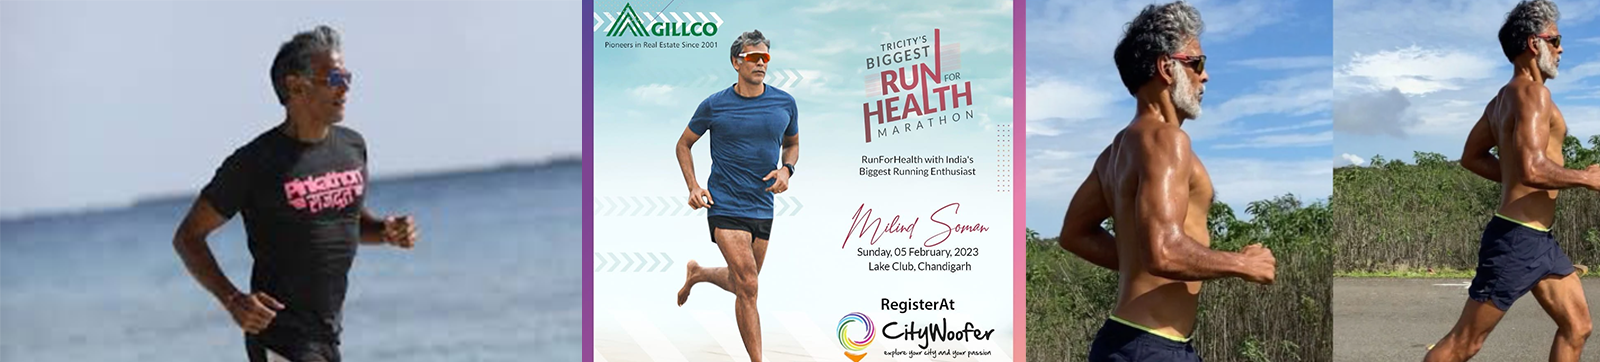 ‘Run for Health’ with Milind Soman in Chandigarh on Feb 5